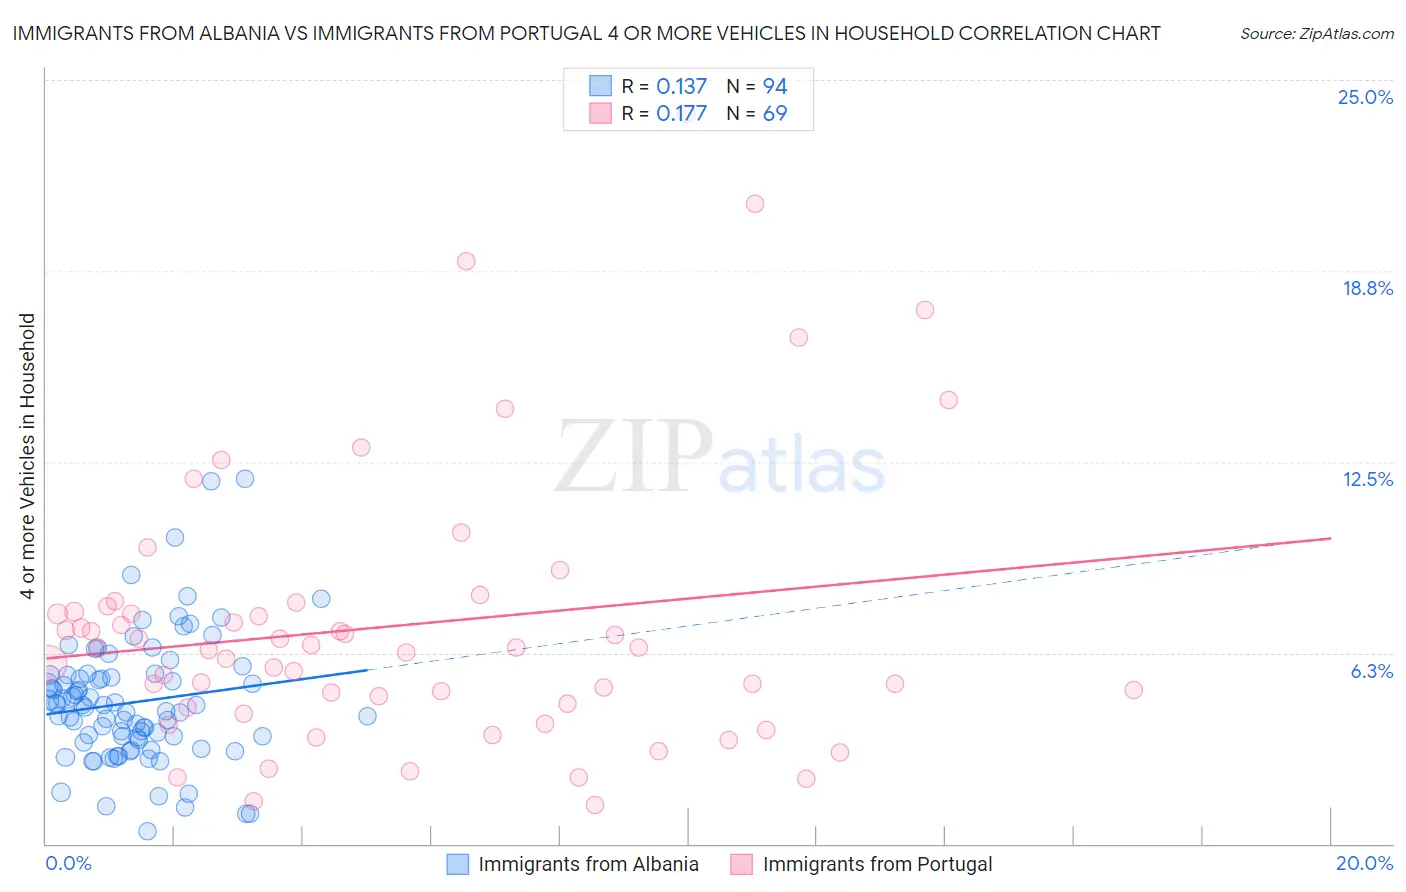 Immigrants from Albania vs Immigrants from Portugal 4 or more Vehicles in Household